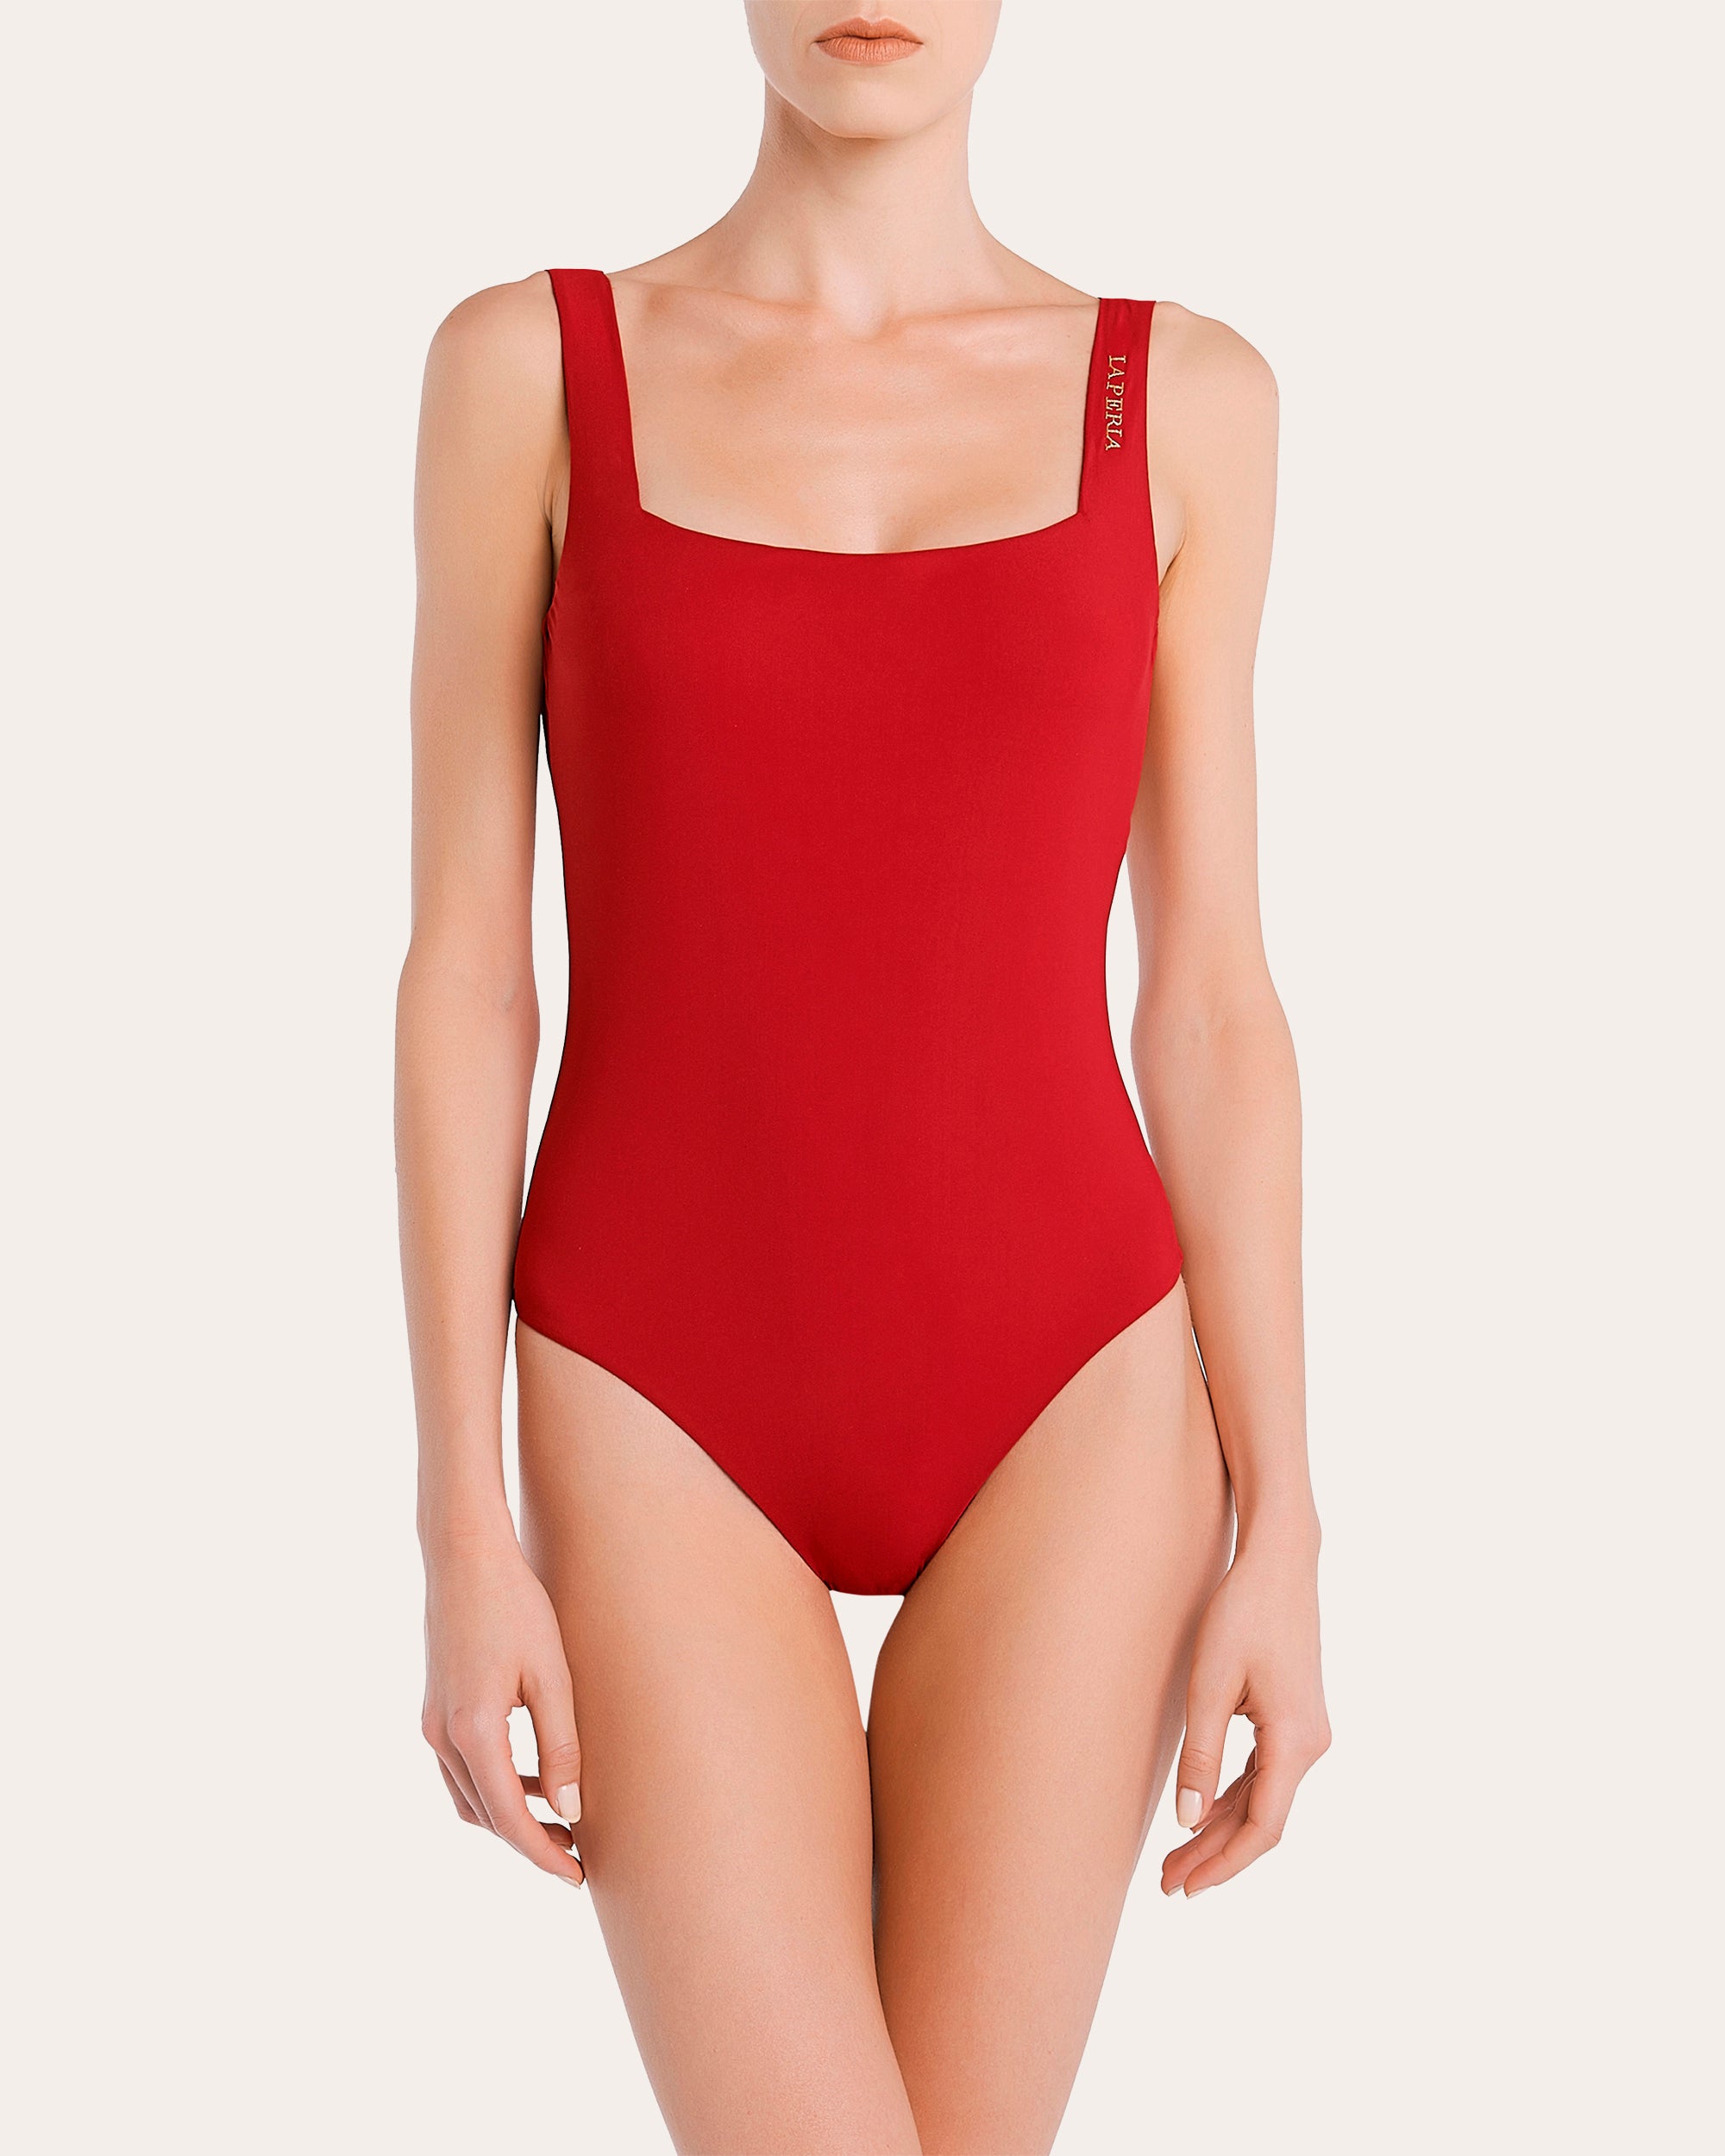 https://cdn.shopify.com/s/files/1/0593/1017/8440/products/la-perla-iconic-non-wired-swimsuit-red-3.jpg?v=1662548468